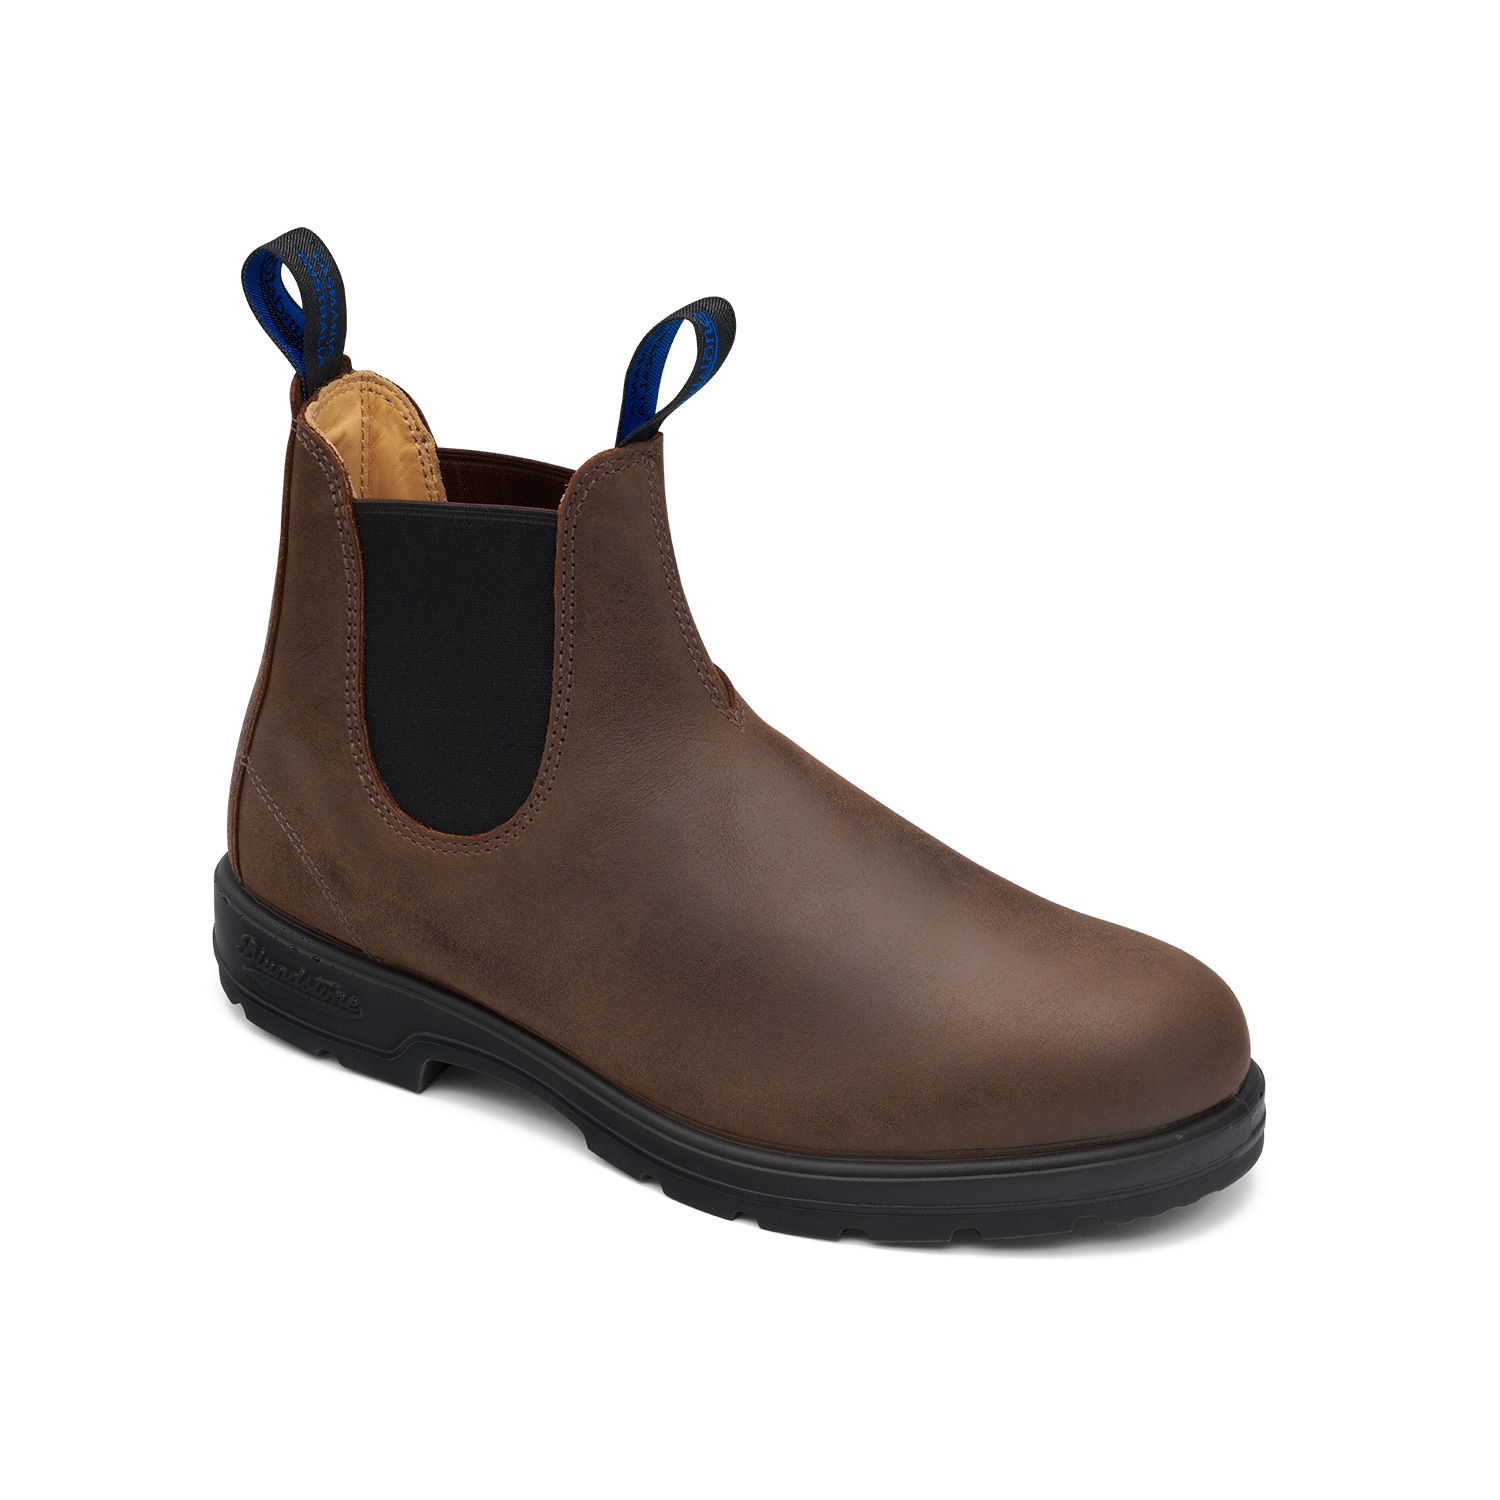 Blundstone 1477 Winter Thermal Classic Antique Brown